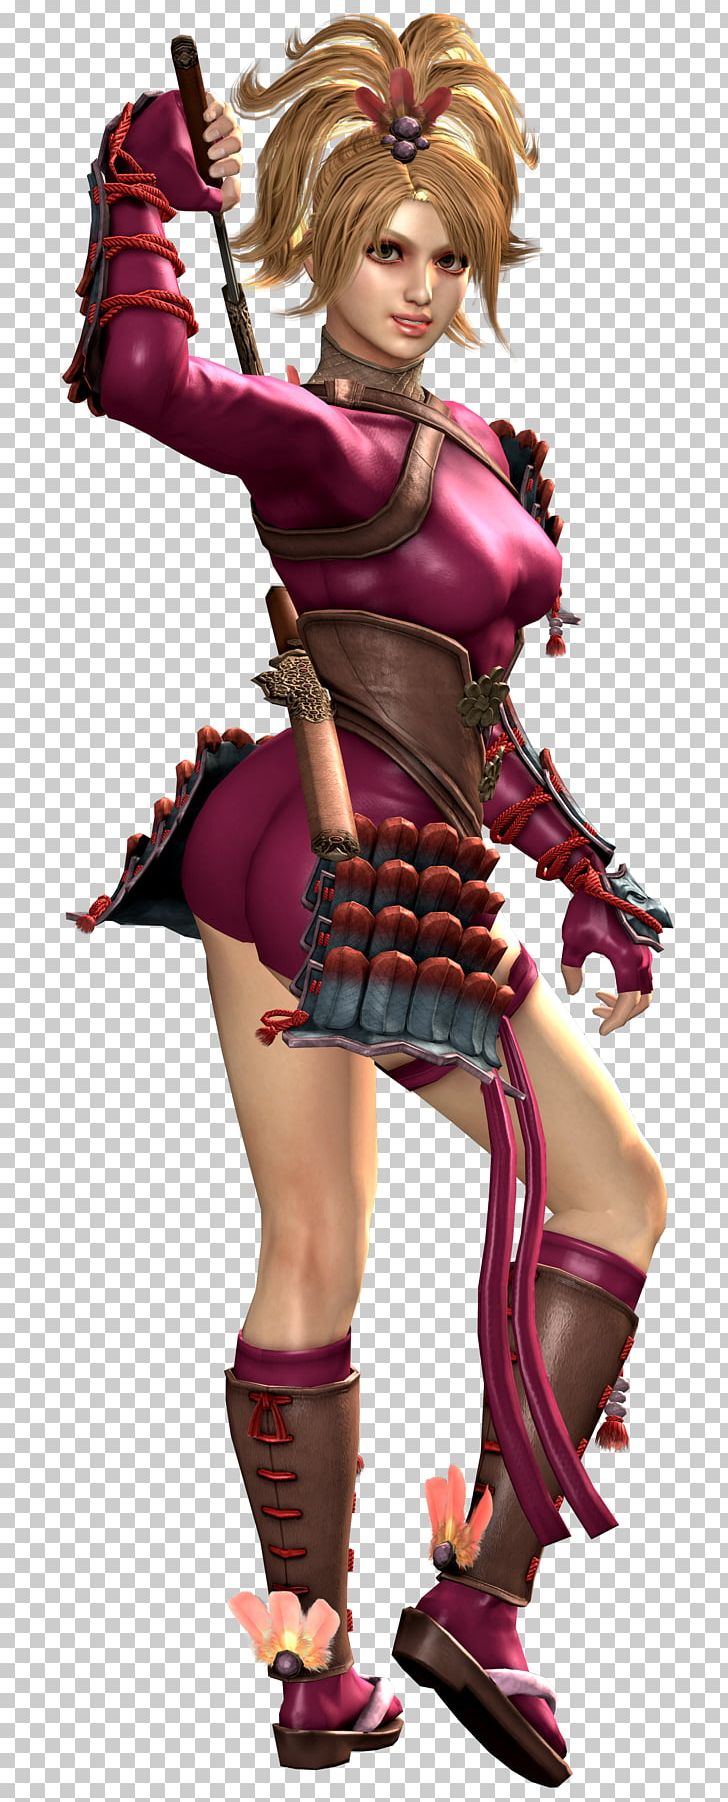 Soulcalibur V Soulcalibur IV Soulcalibur III Soul Edge Taki PNG, Clipart, Action Figure, Anime, Armour, Character, Costume Free PNG Download